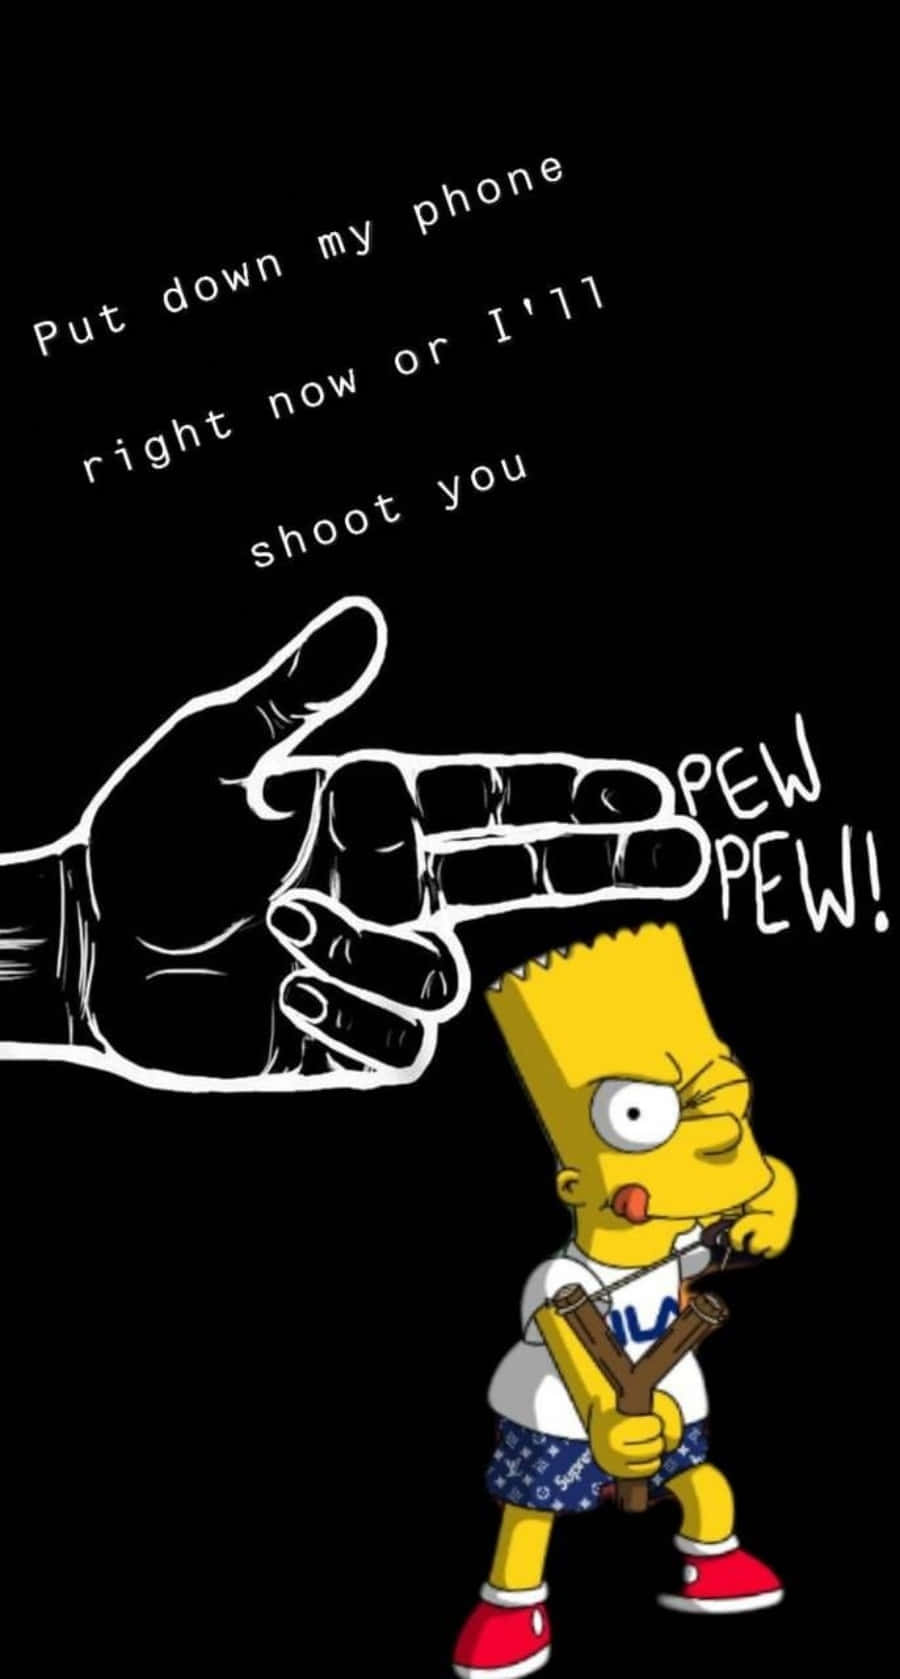 Funny Bart Simpson Put Down My Phone Quote Wallpaper